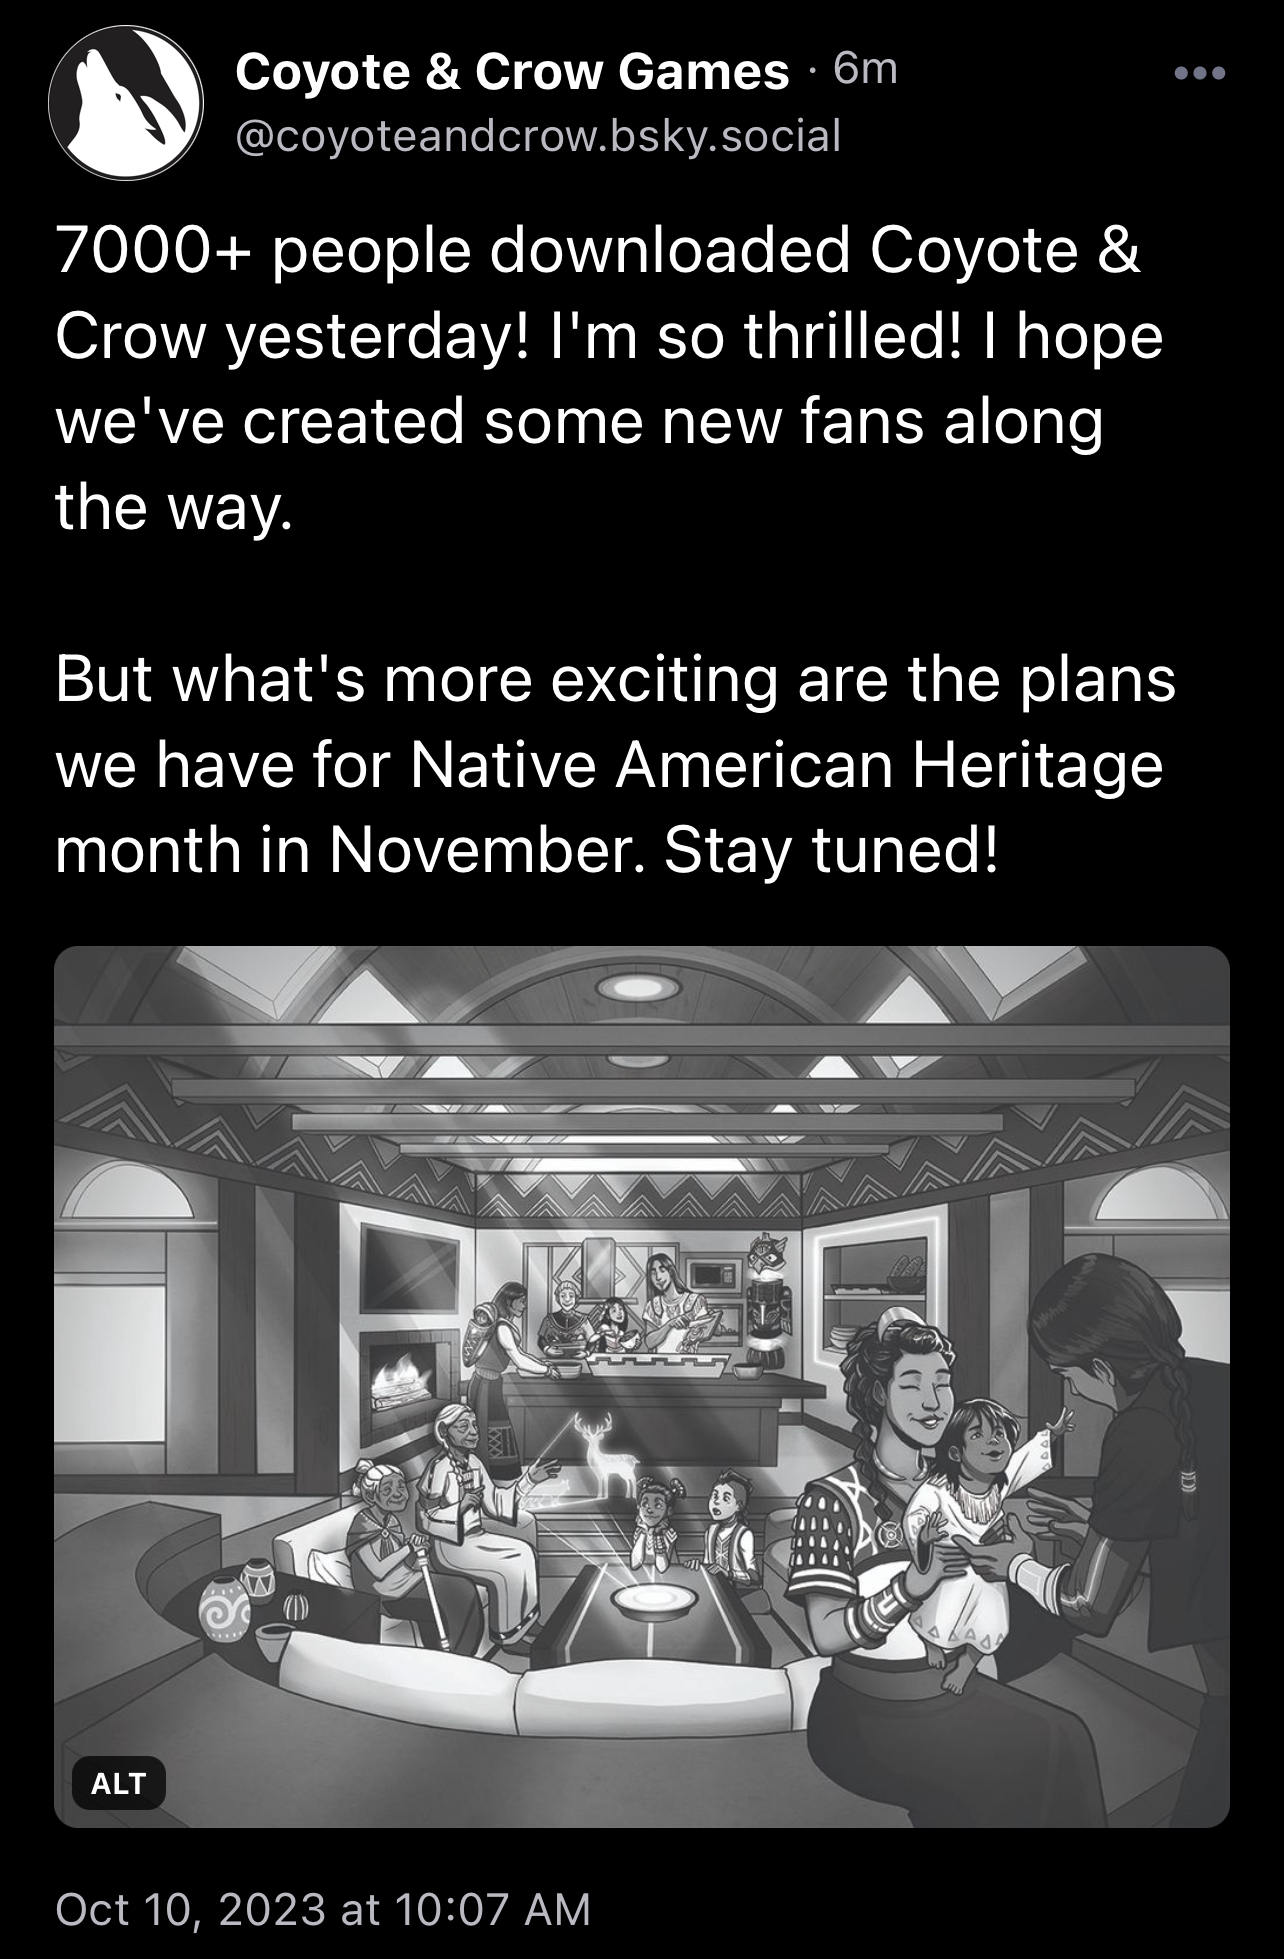 7000+ people downloaded Coyote & Crow yesterday! I'm so thrilled! I hope we've created some new fans along the way.  But what's more exciting are the plans we have for Native American Heritage month in November. Stay tuned! The internal image is A multigenerational family enjoying a meal in Coyote & Crow